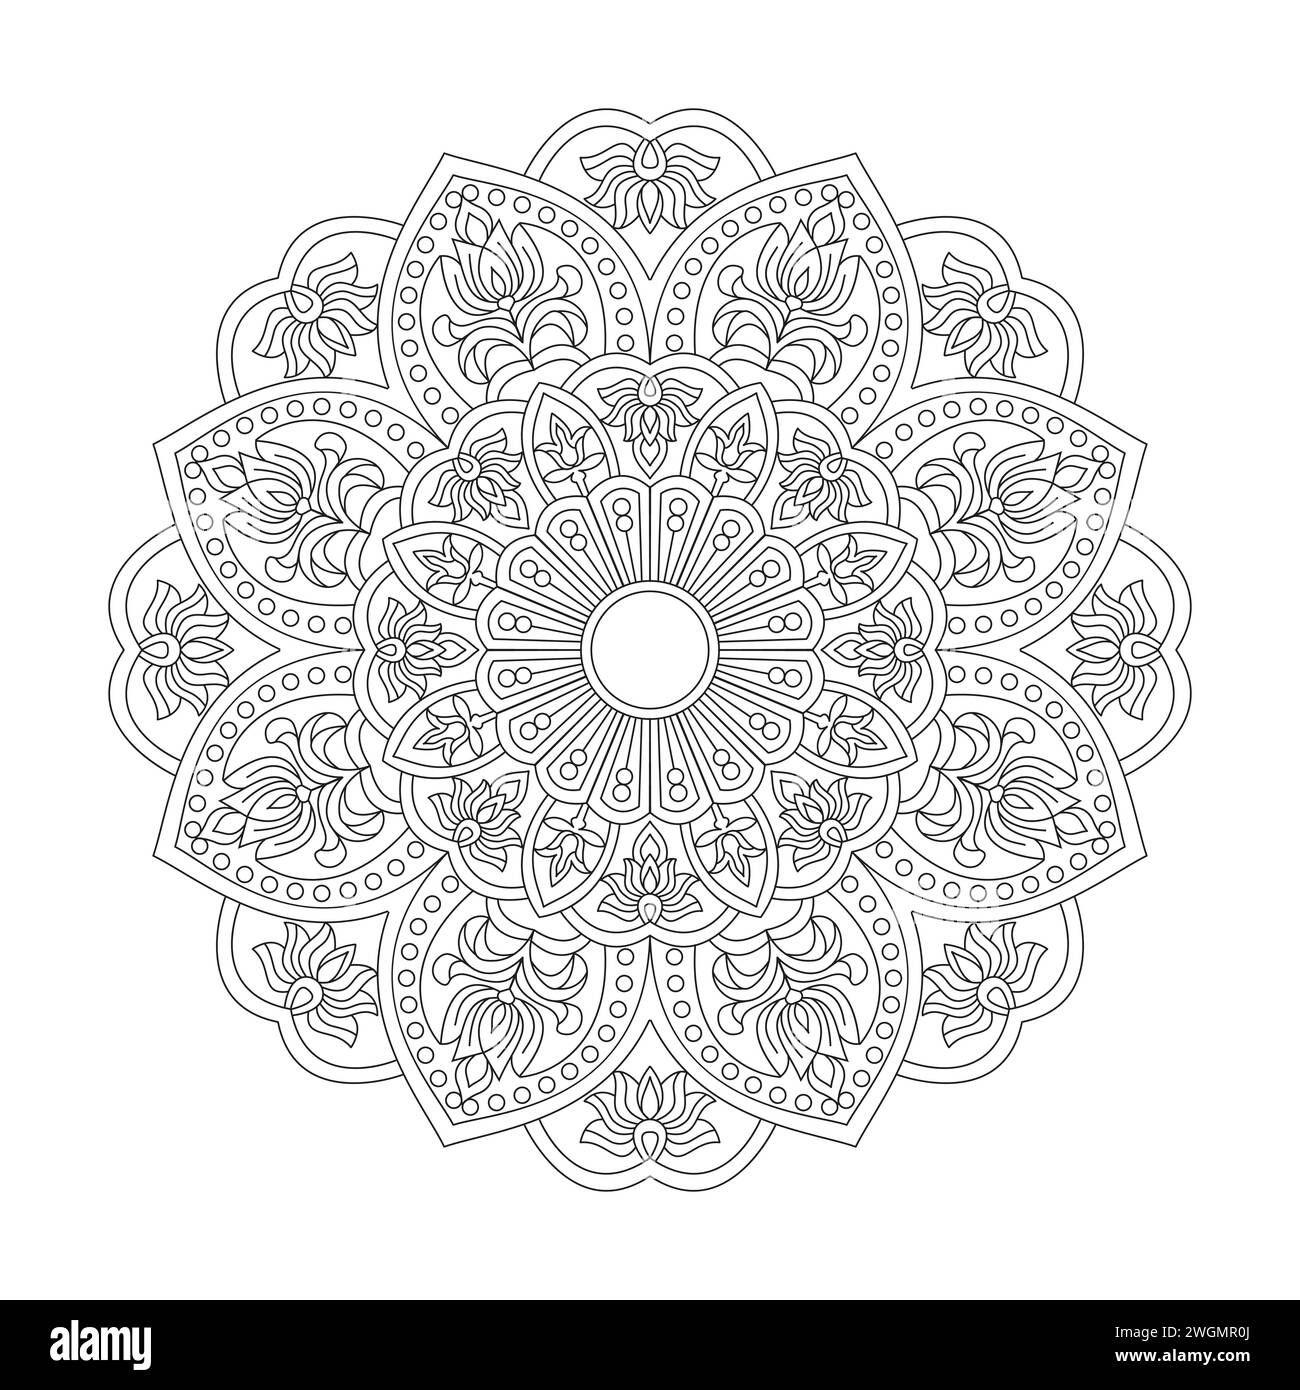 Peaceful Mindfulness Mandala Coloring Book Page for kdp Book Interior. Peaceful Petals, Ability to Relax, Brain Experiences, Harmonious Haven, Peacefu Stock Vector